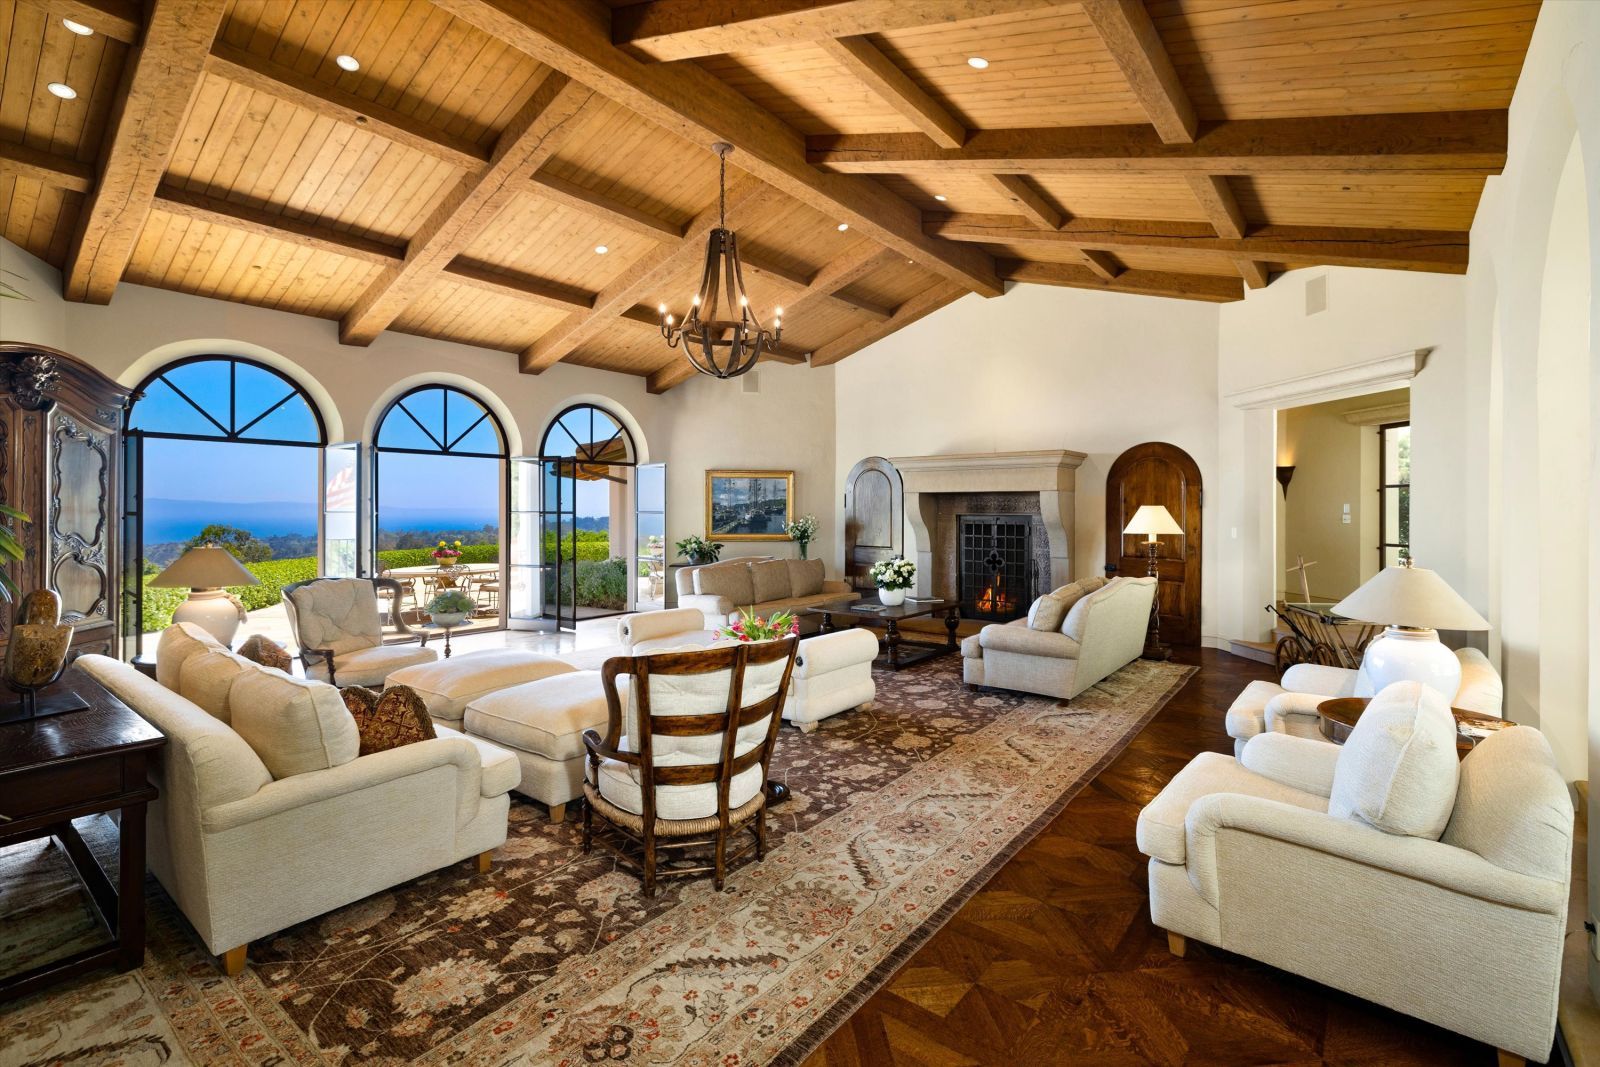 Expansive and beautifully furnished living room of a Montecito home, with three large arched windows looking out to an ocean view.